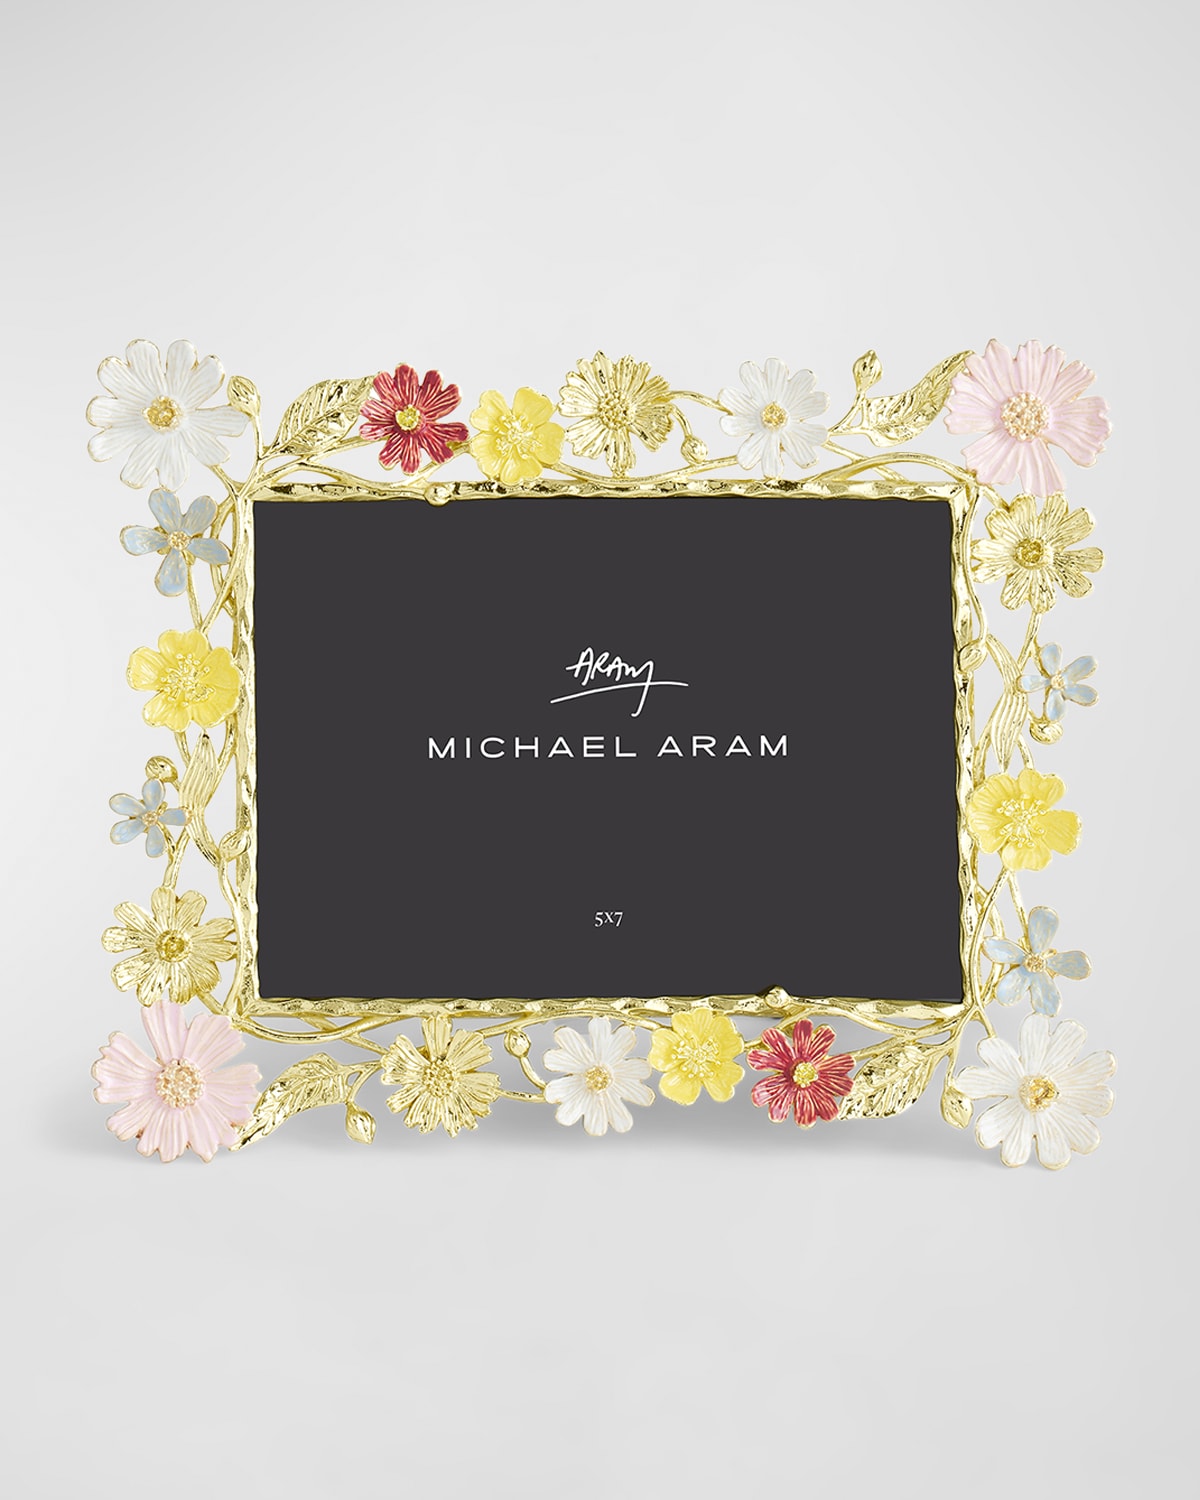 MICHAEL ARAM WILDFLOWERS PICTURE FRAME, 5" X 7"